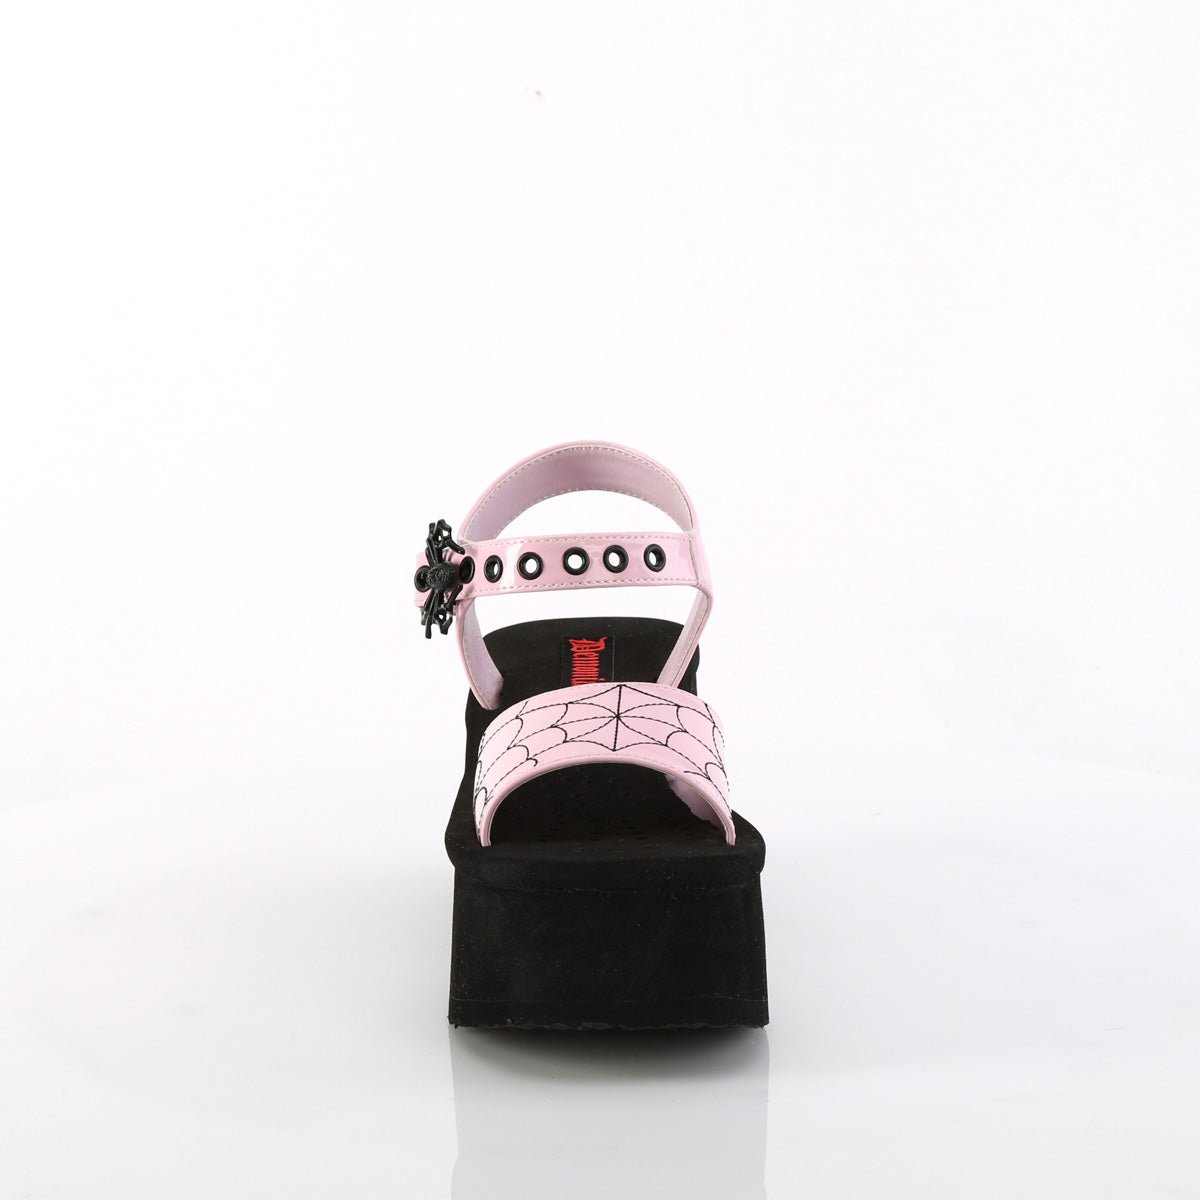 Too Fast | Demonia FUNN-10 Baby Pink Holographic Patent Leather Platforms